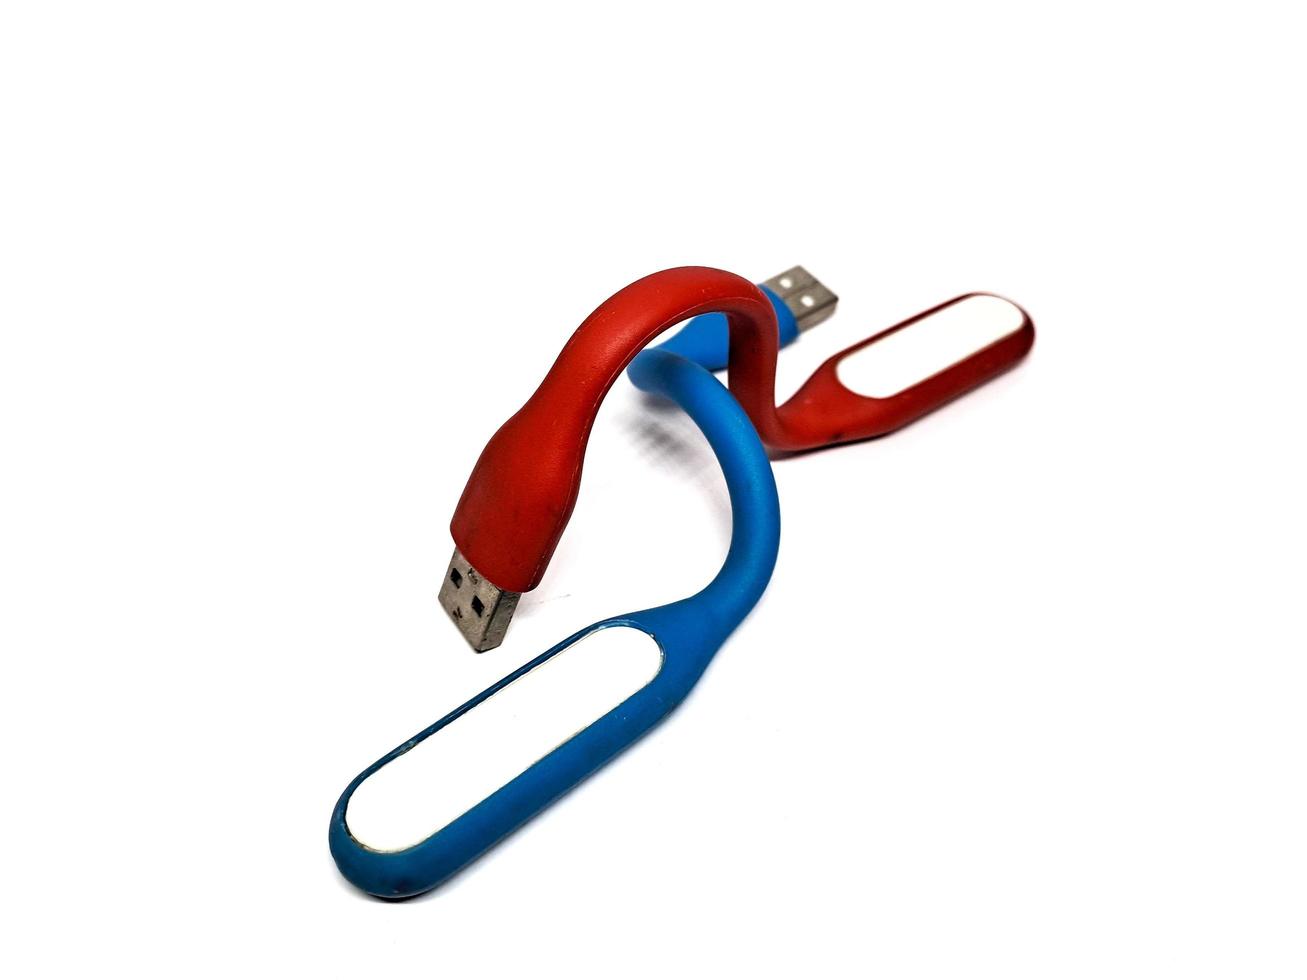 Red blue LED light, a stick that can be used as a power bank, white background photo